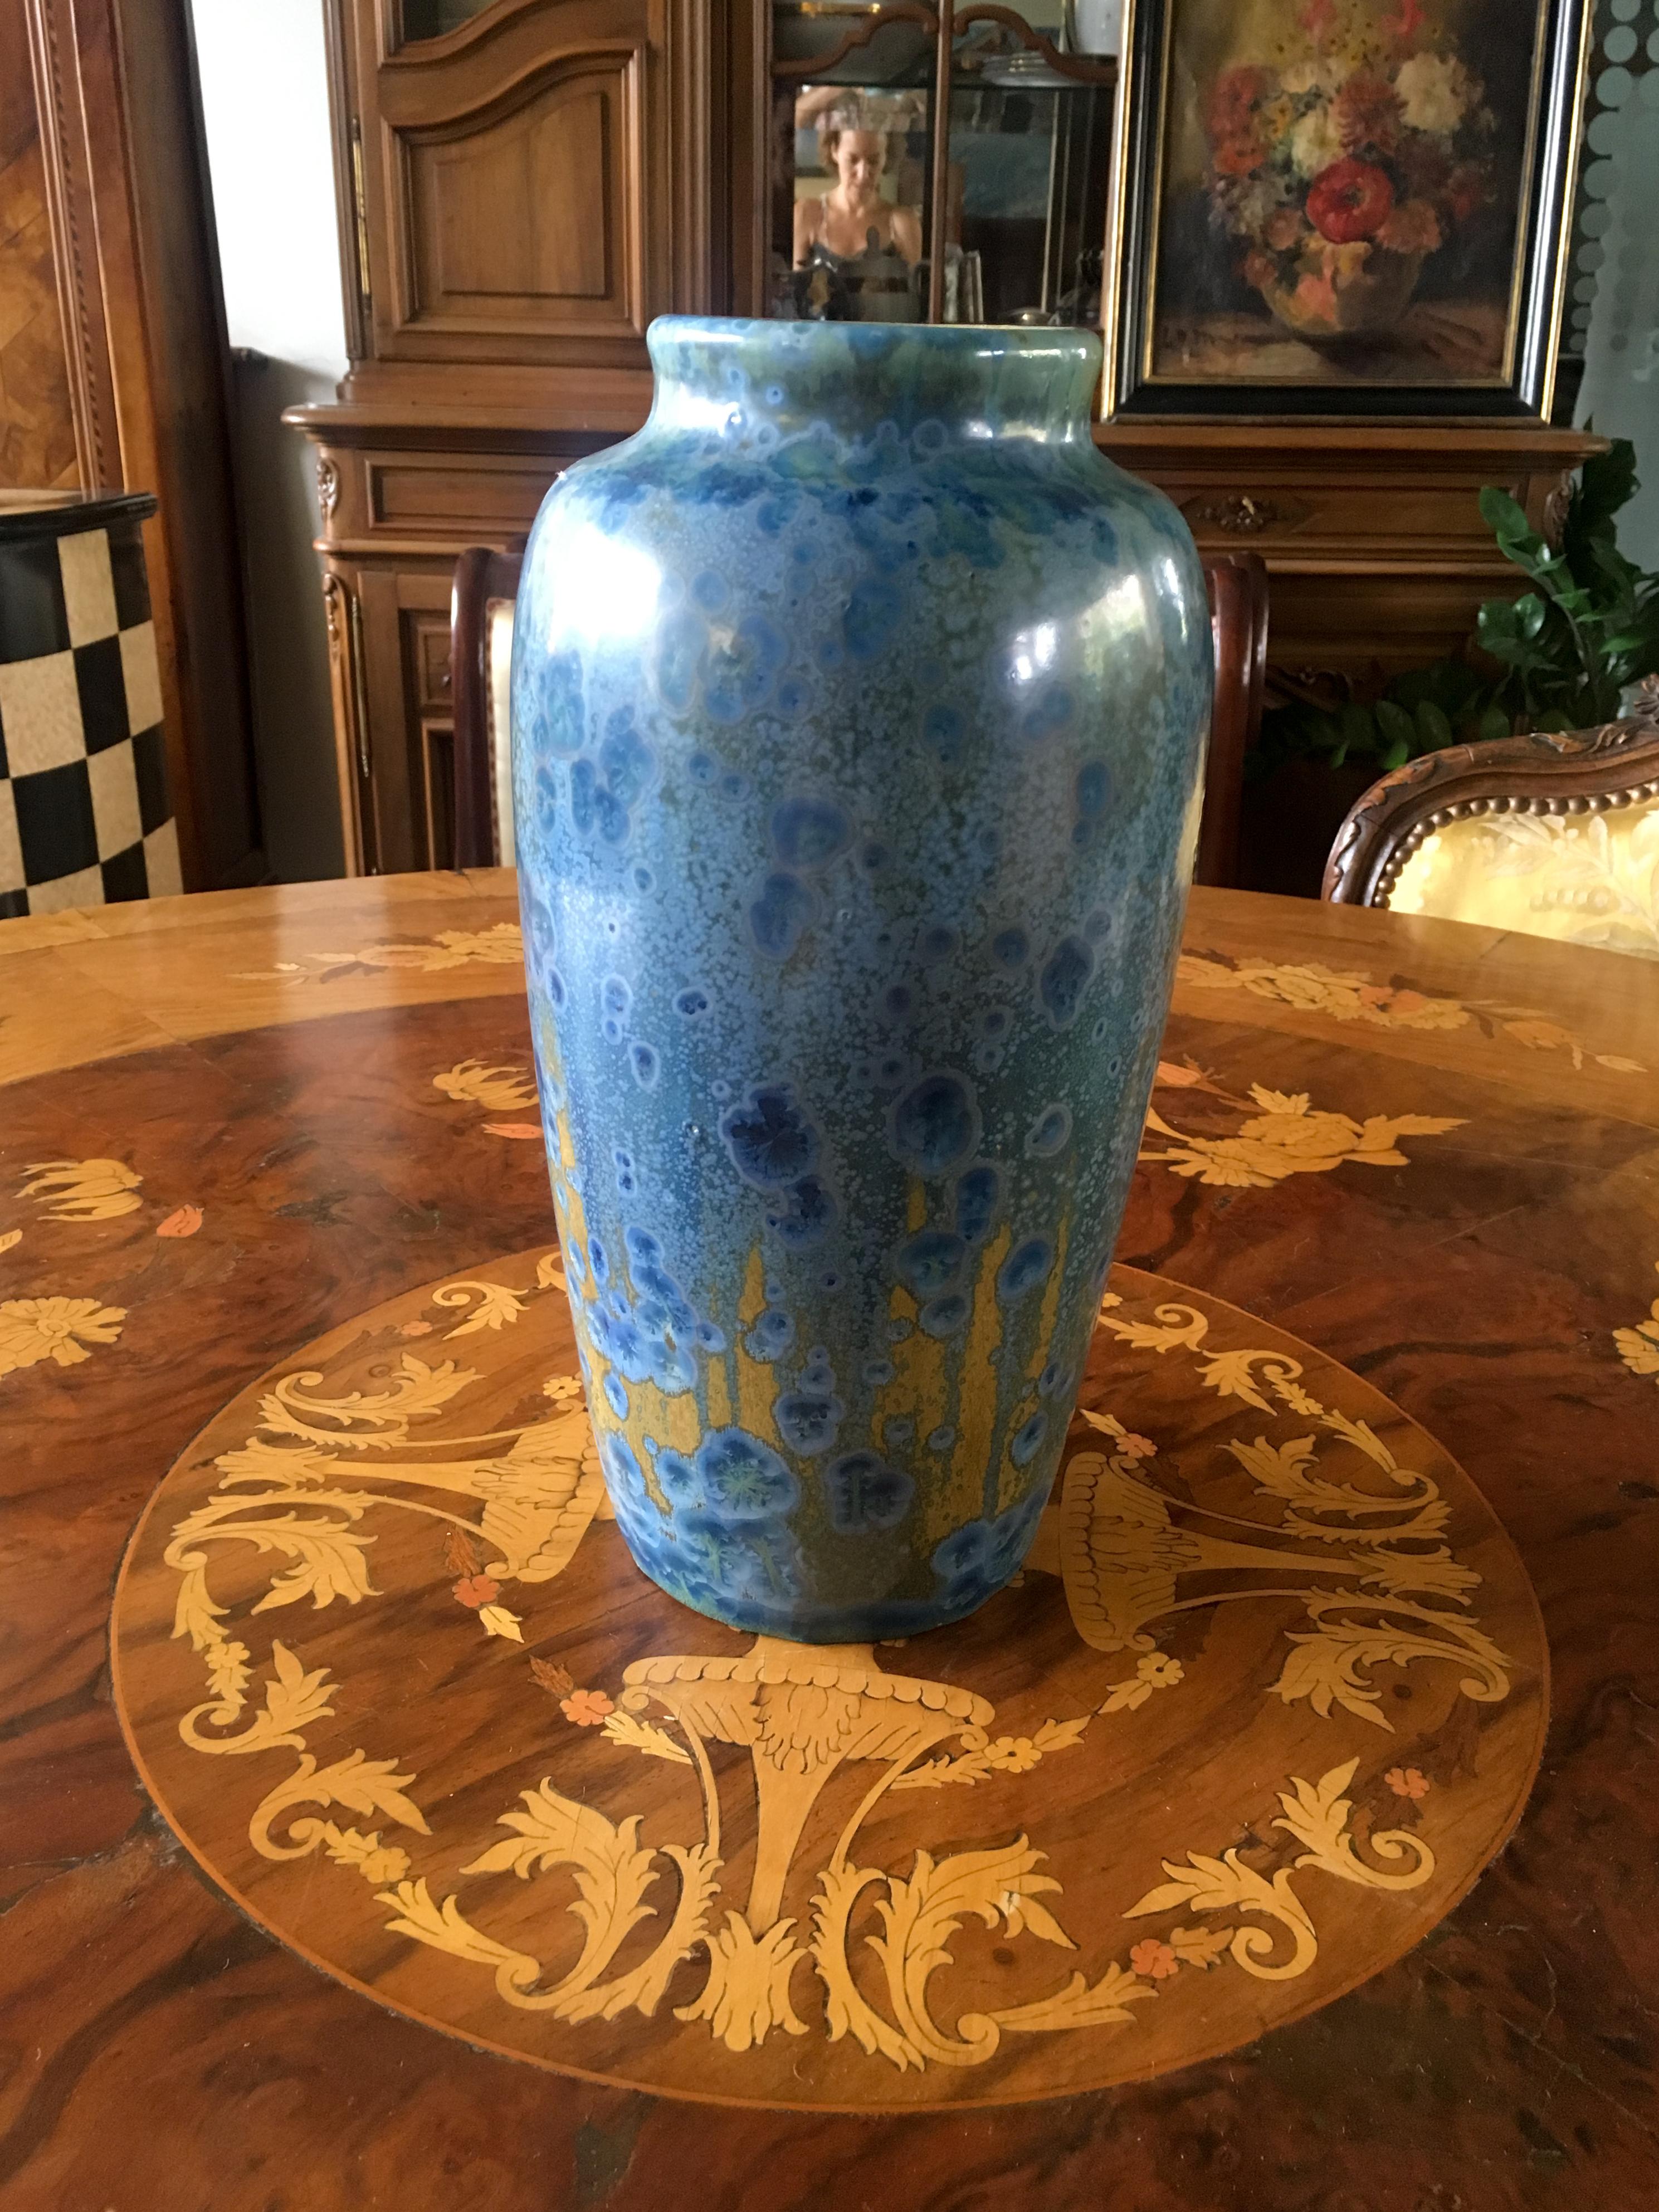 A Pierrefonds pottery vase in tones of blue, tan and brown, partially decorated in crystalline glazes, stamped factory marks.
France, circa 1900.